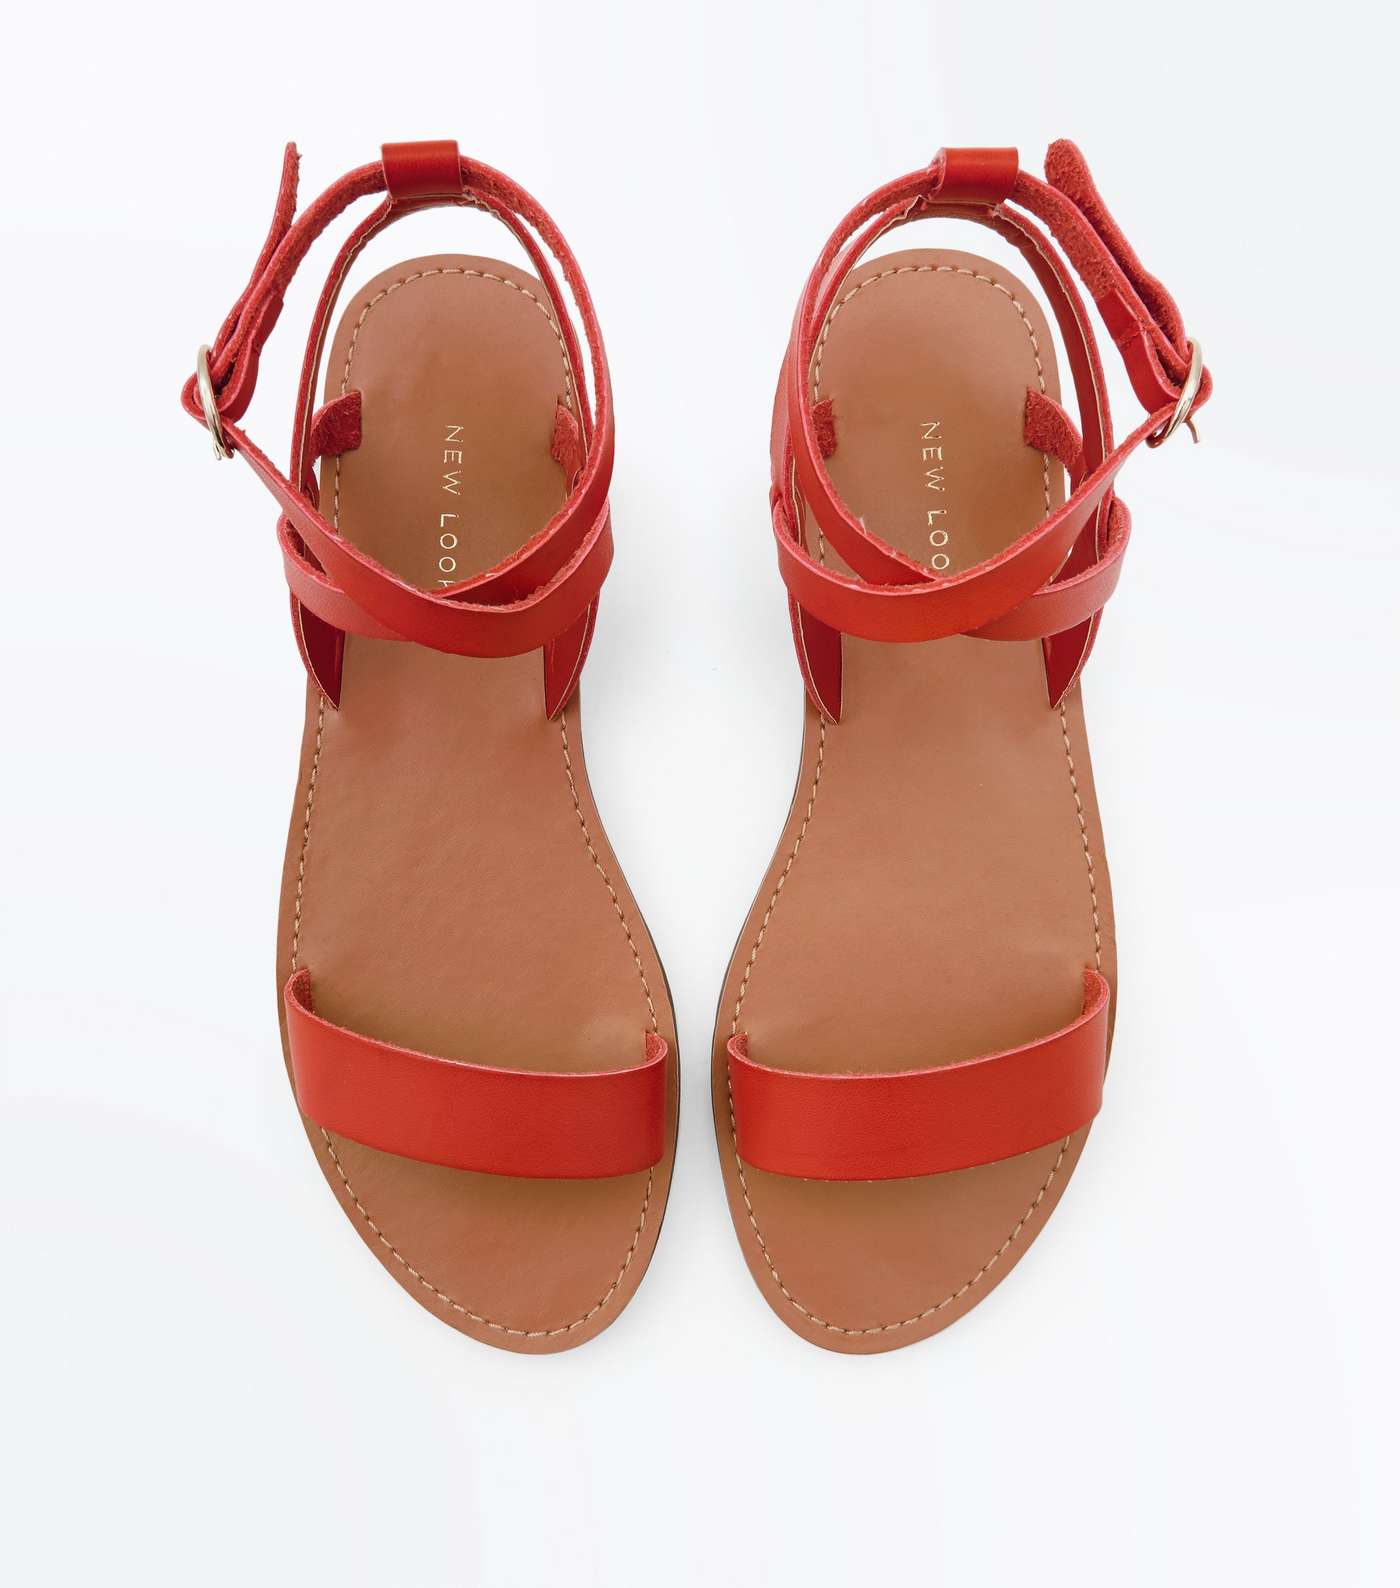 Red Ankle Cross Strap Sandals Image 4